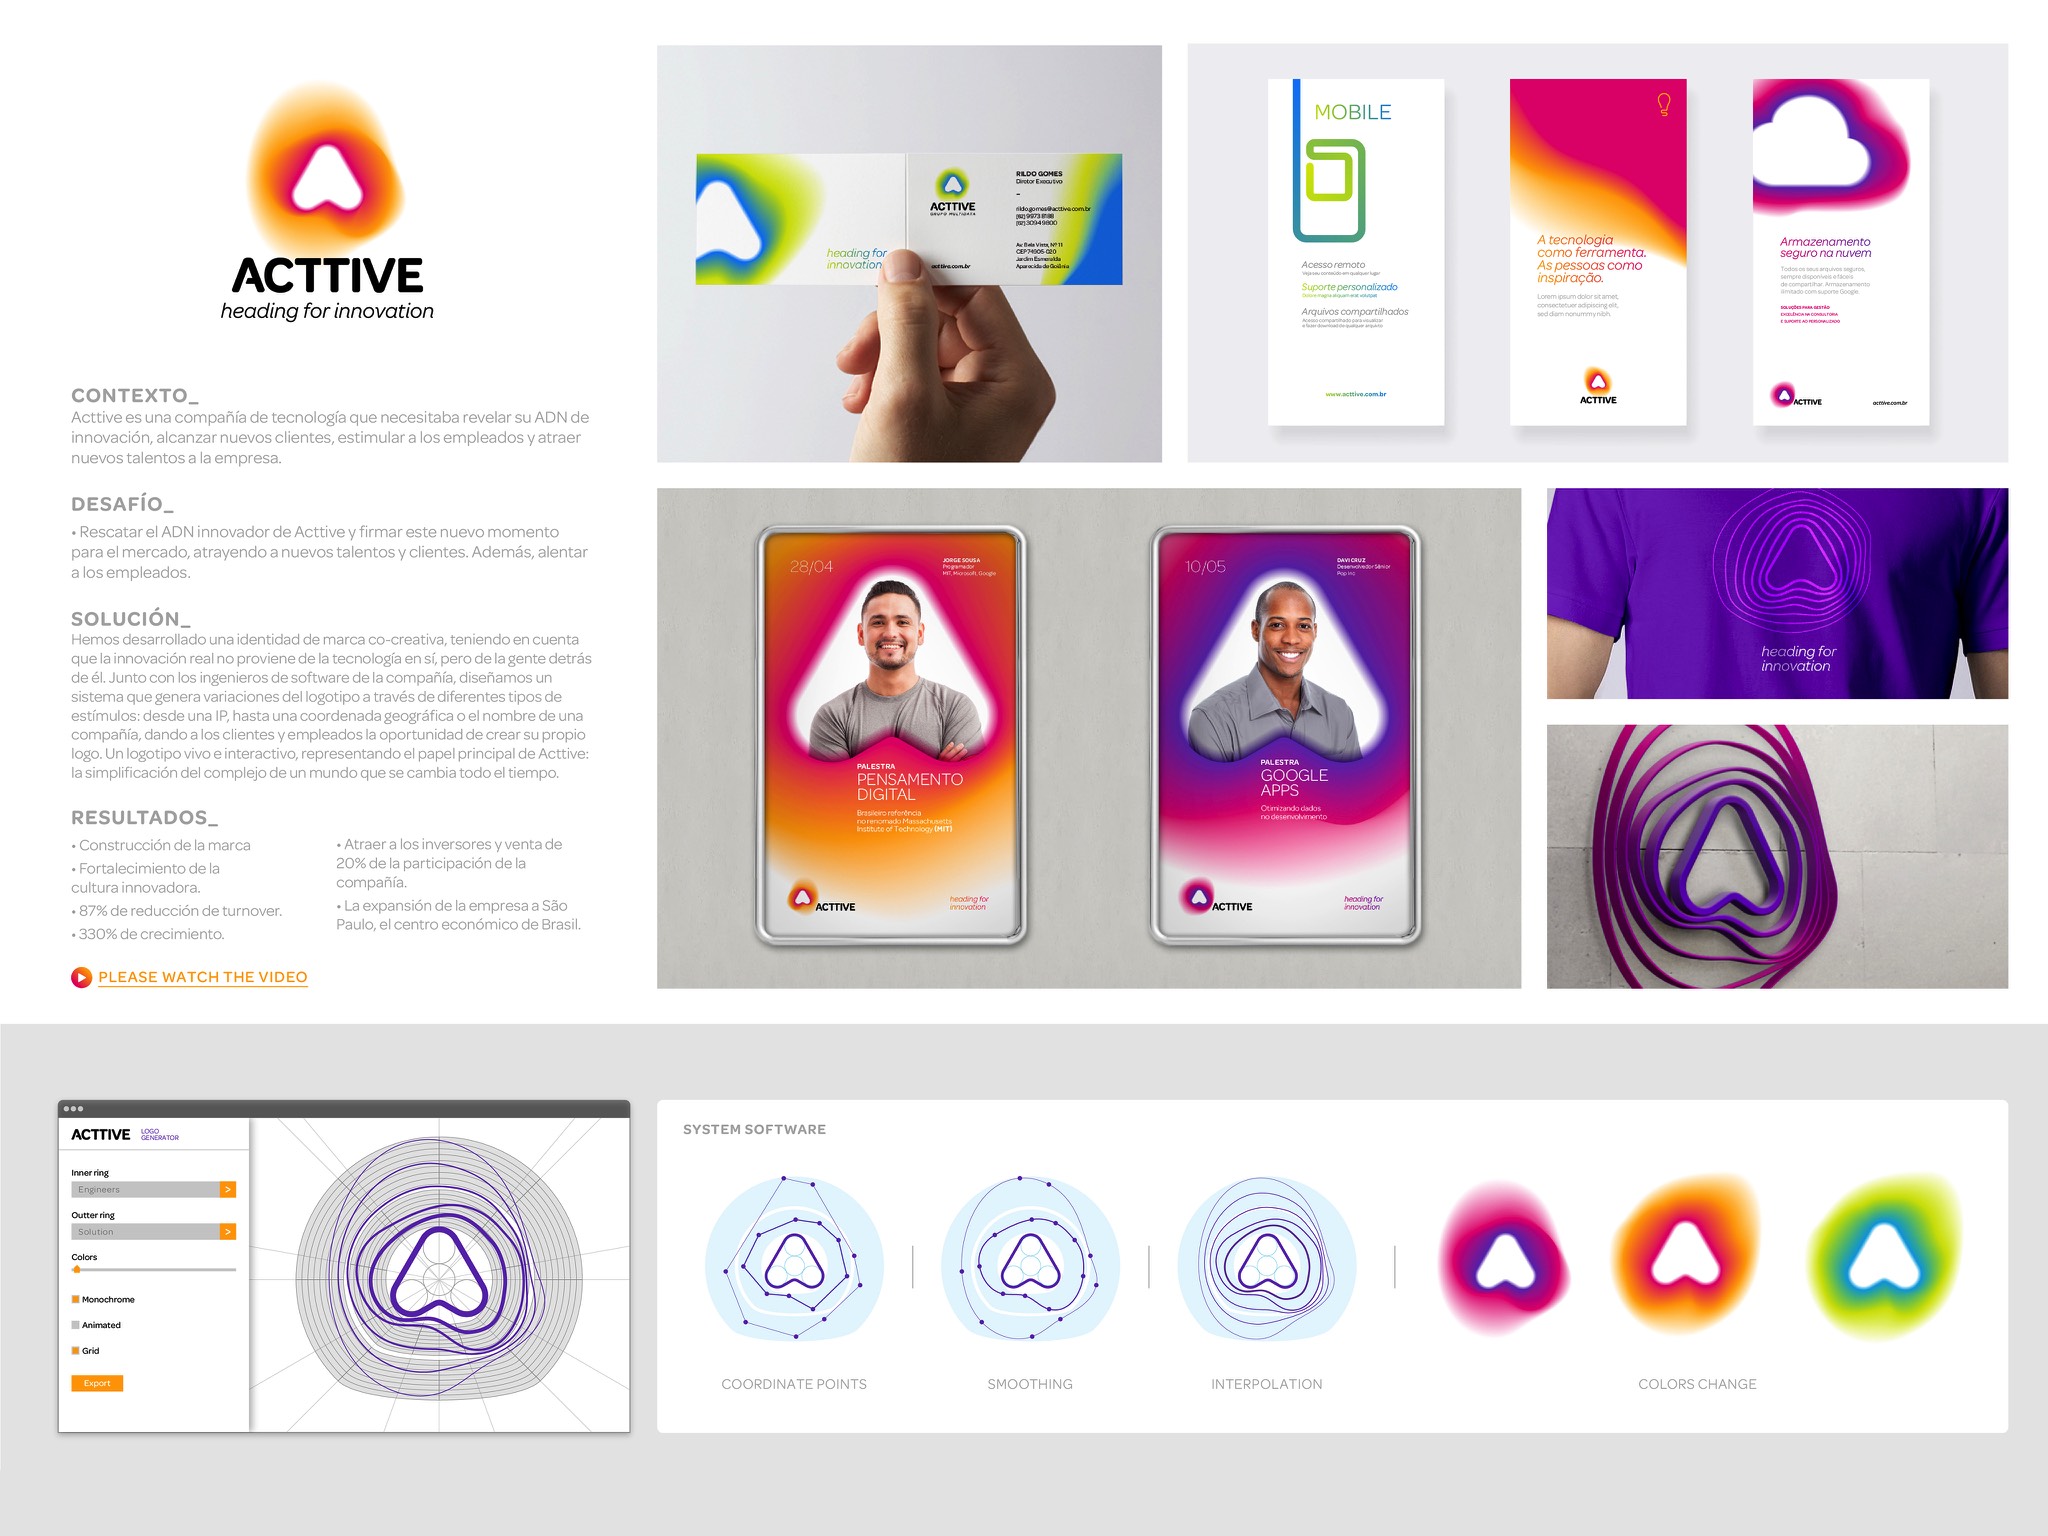 Acttive - Heading for innovation